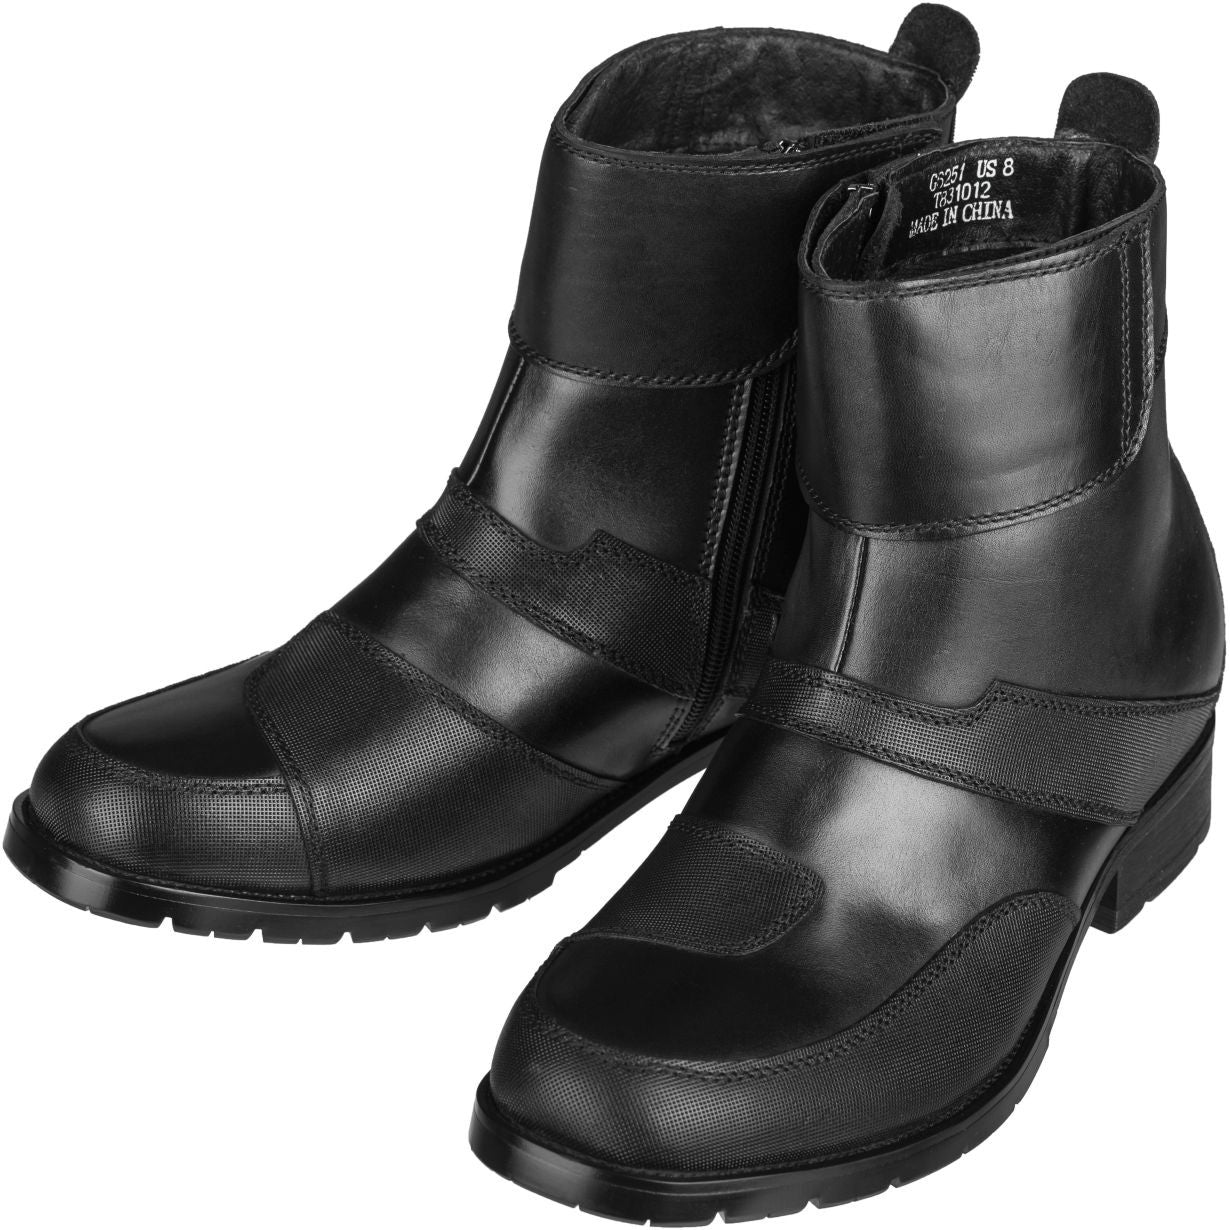 Elevator shoes height increase Black CALTO Elevator Motorcycle Boots - 3.3 Inches - G6251